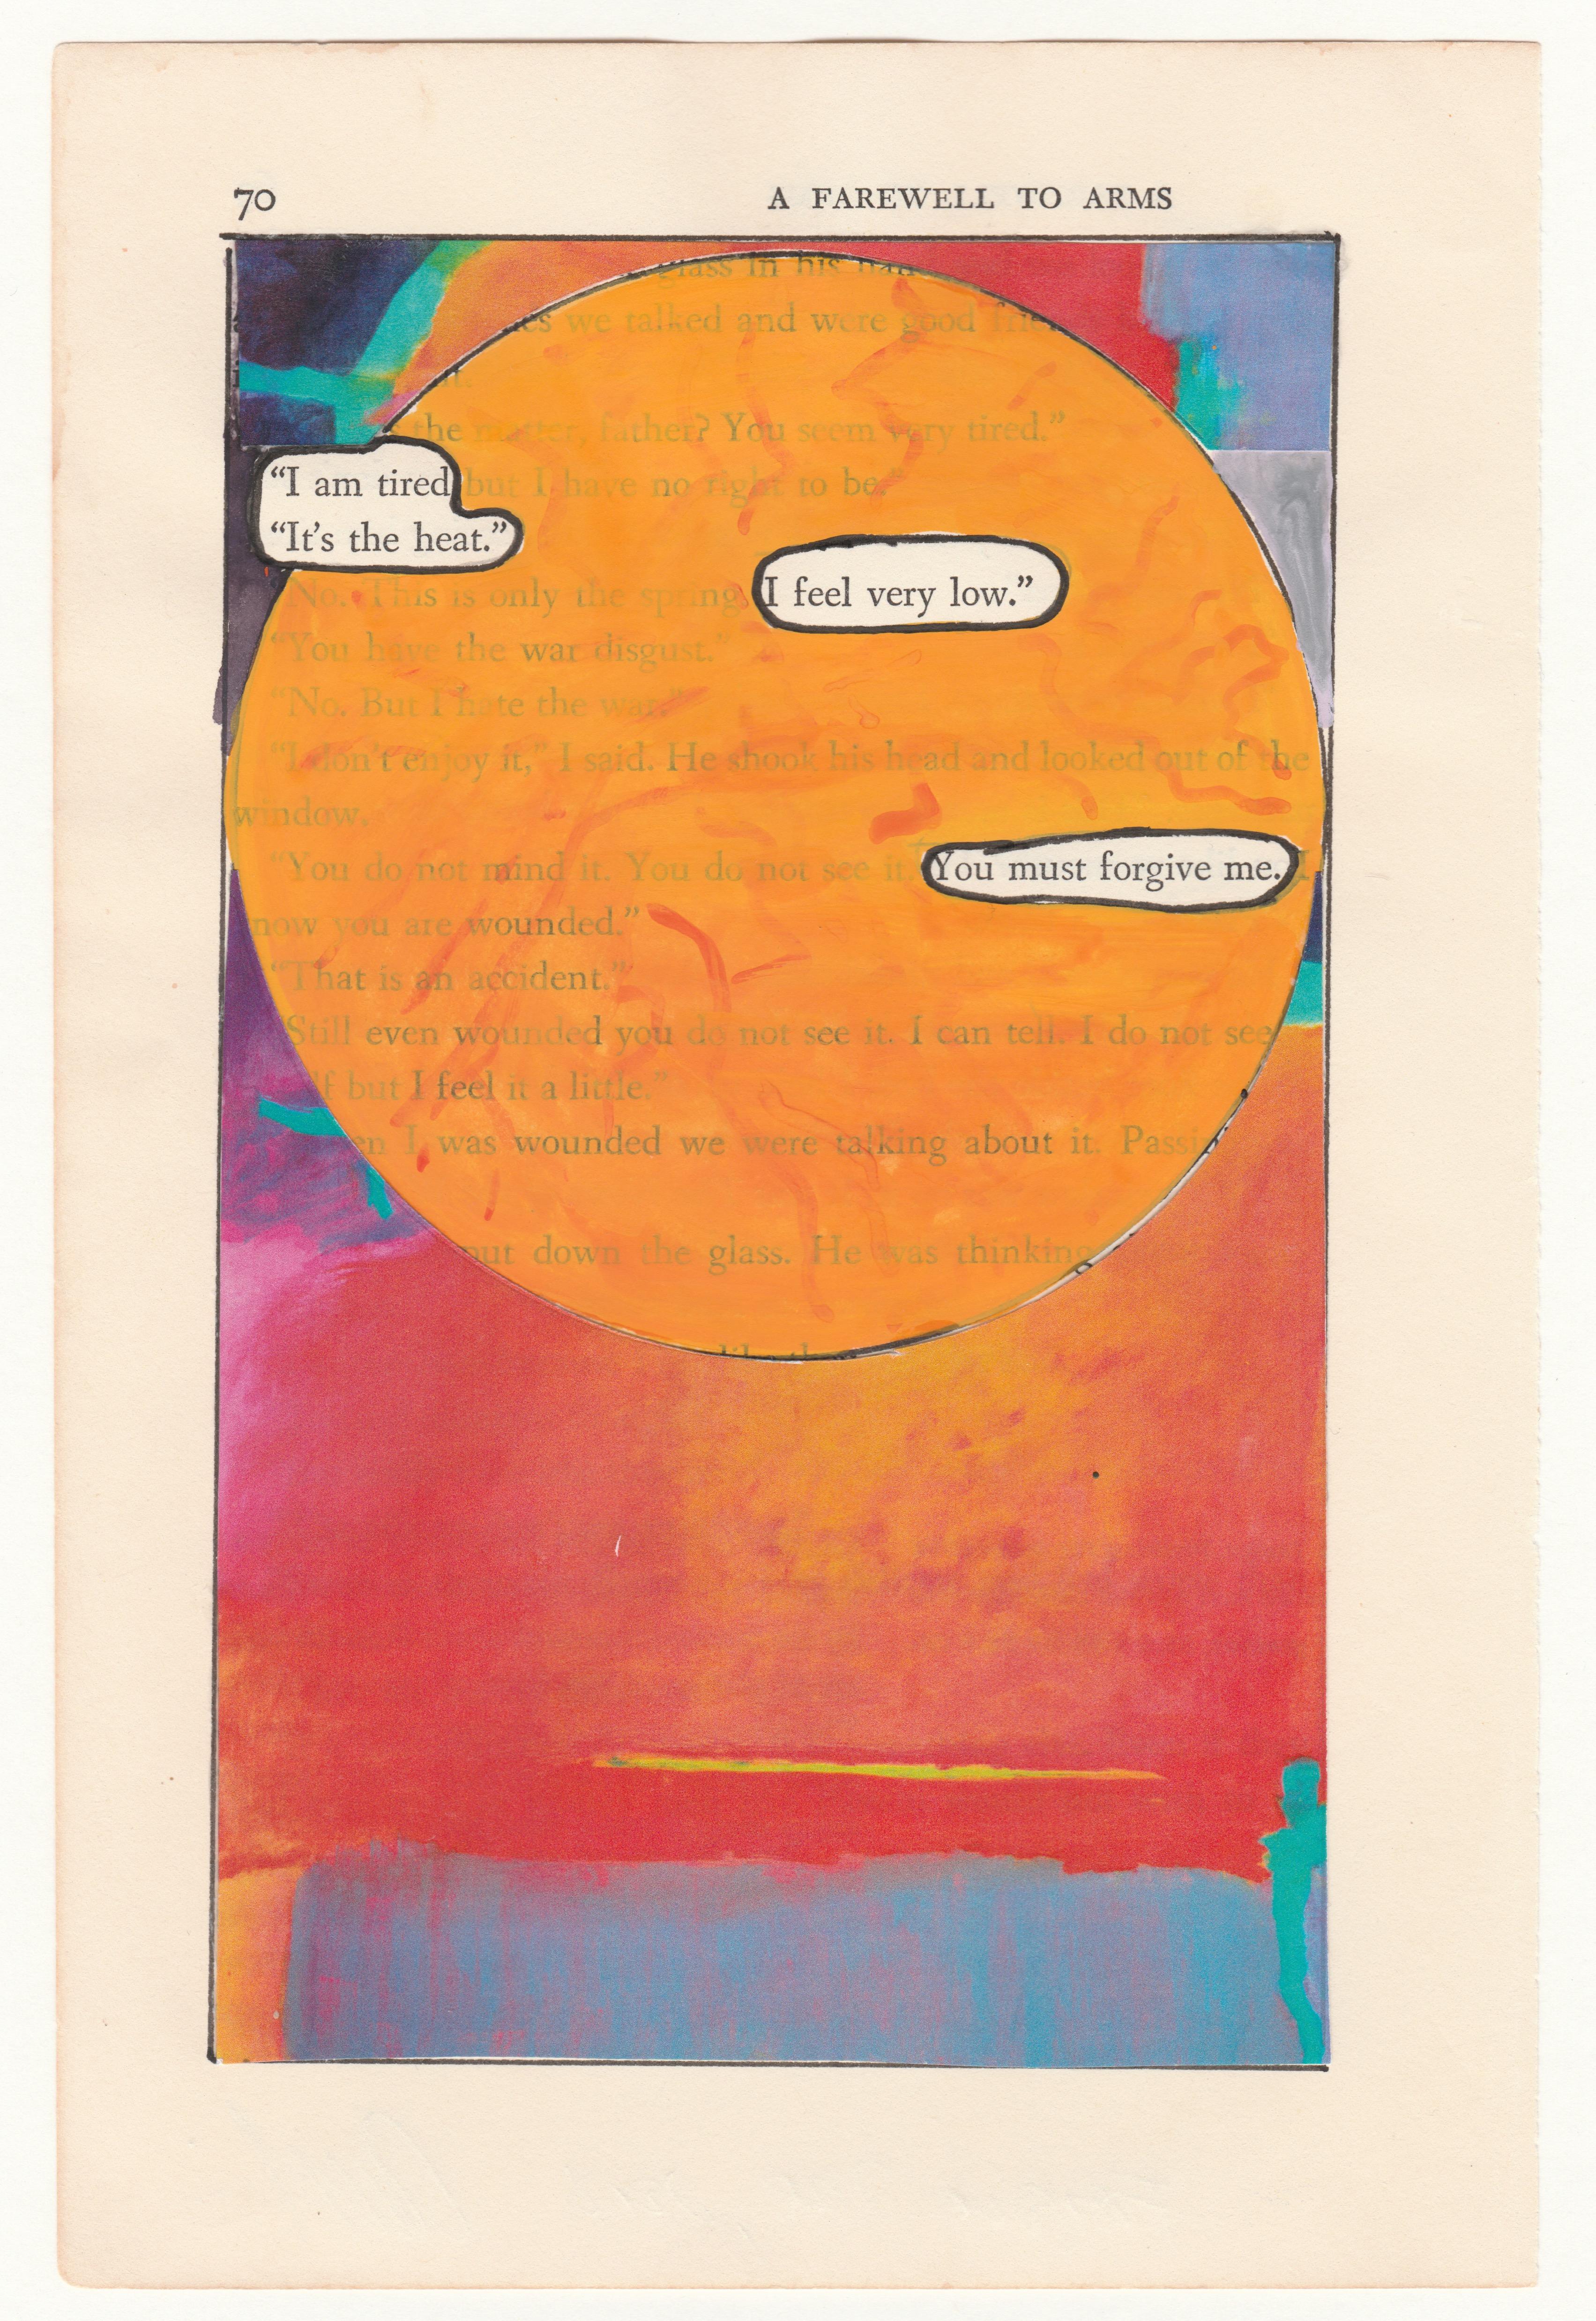 "#70 – I AM TIRED", ink, pencil, gouache, collage, vintage, hemingway, poetry